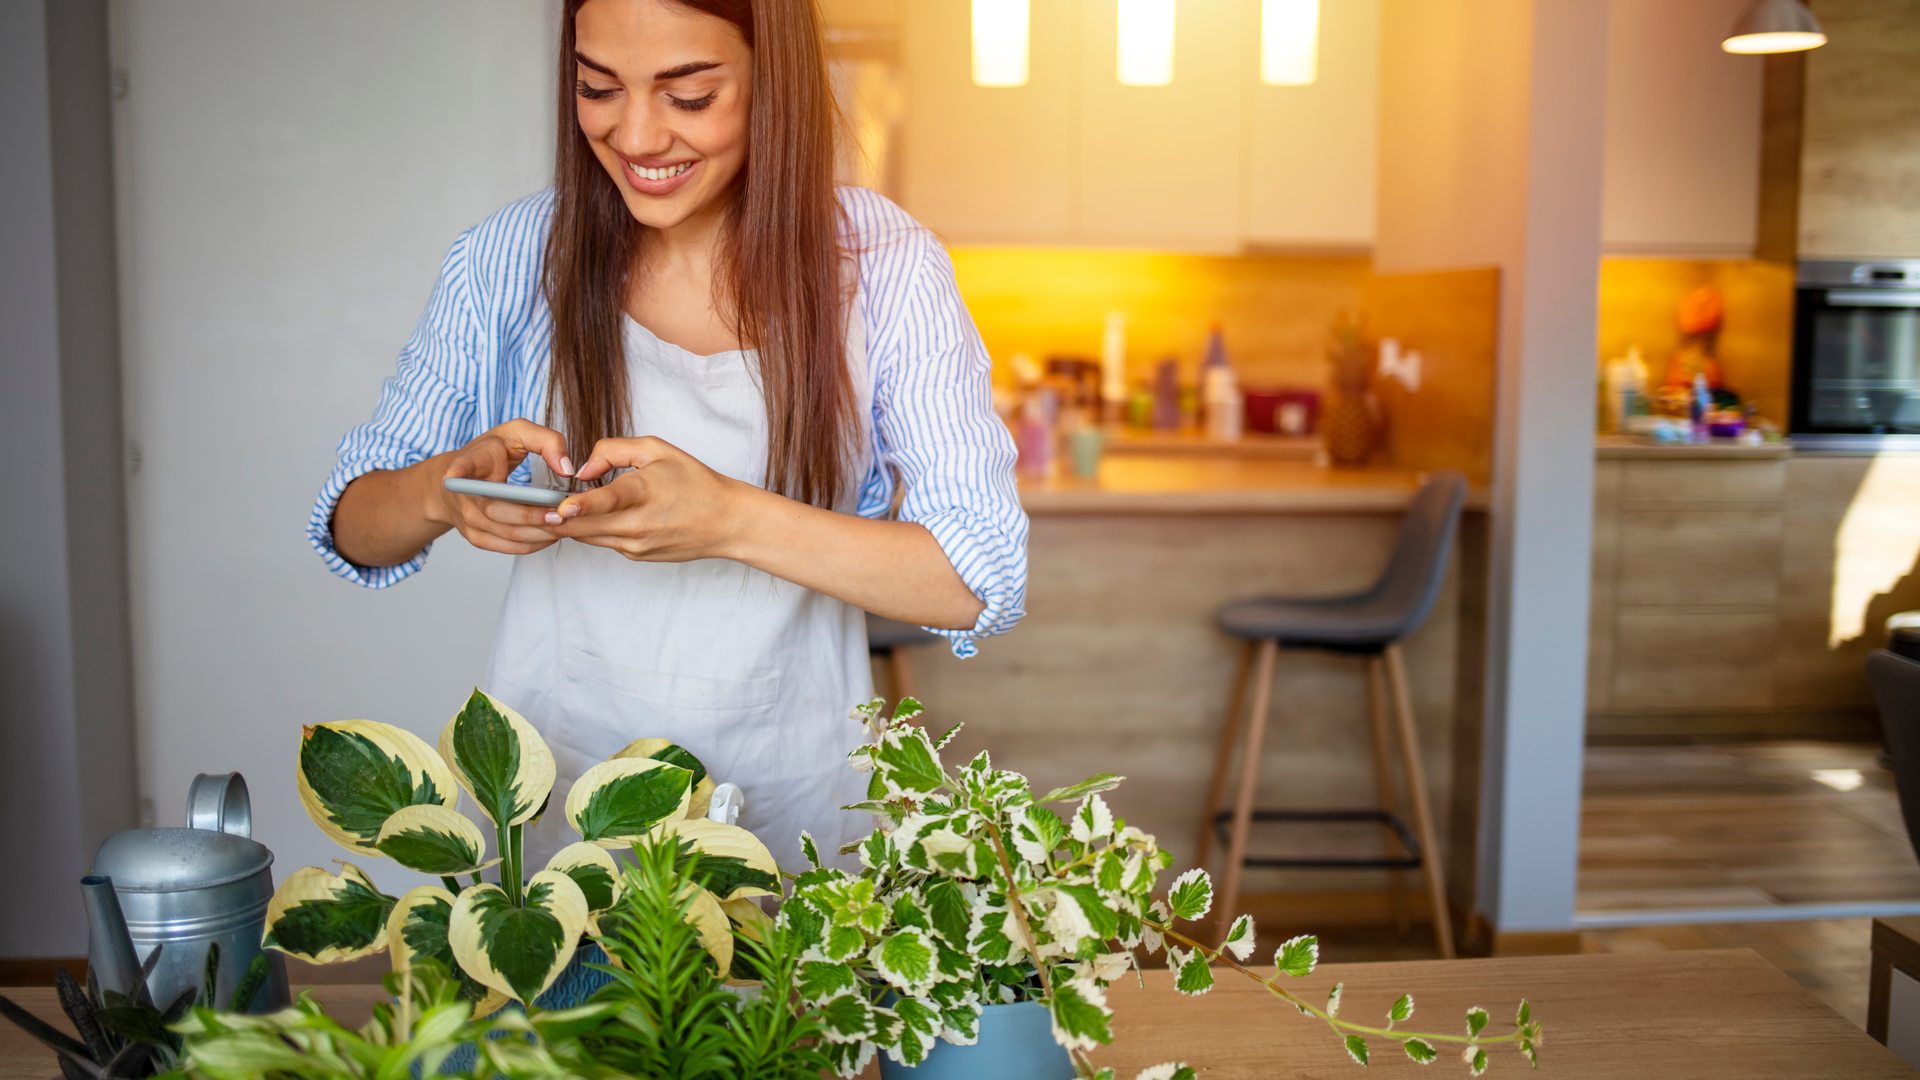 Happy Woman Taking Pictures of Green Plants and Flowers With a Smartphone. Woman Taking Pictures of Green Plants. Woman Caring for House Plant.